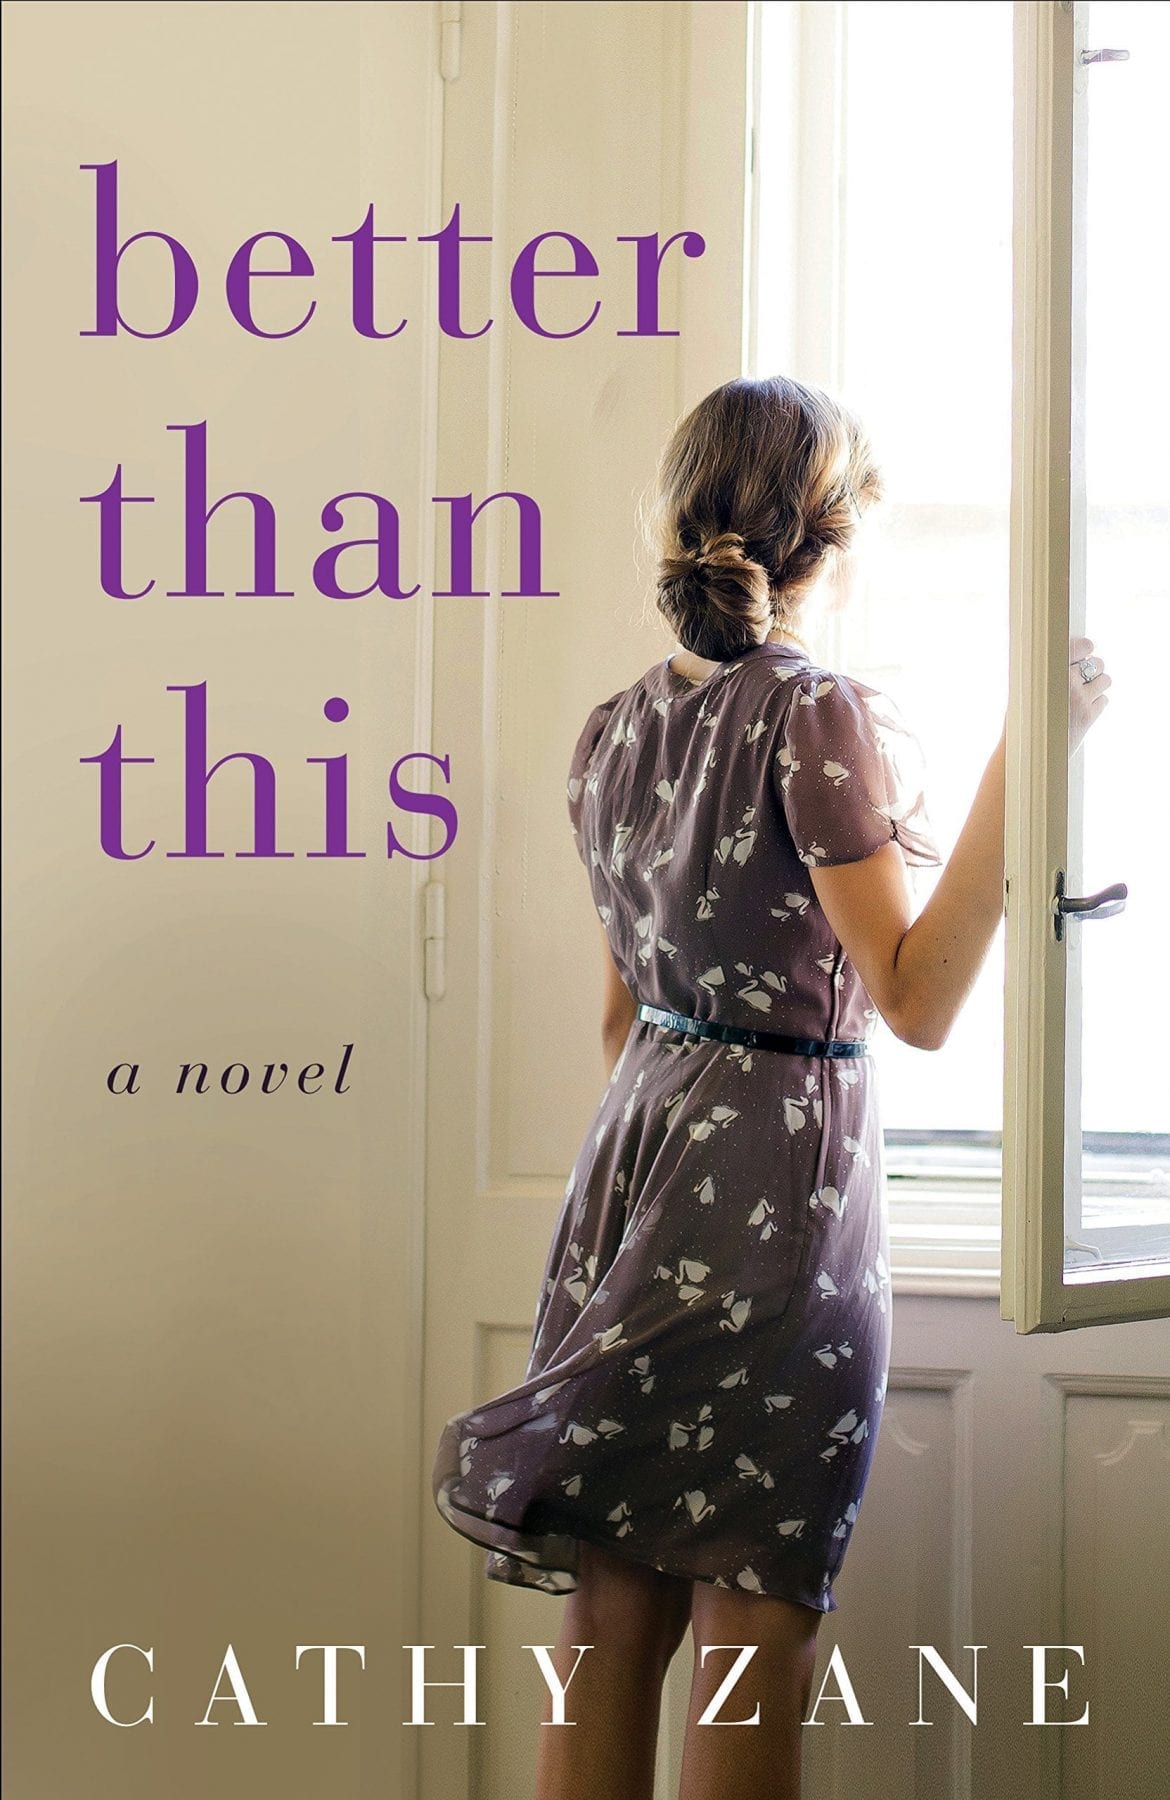 Better Than This by Cathy Zane